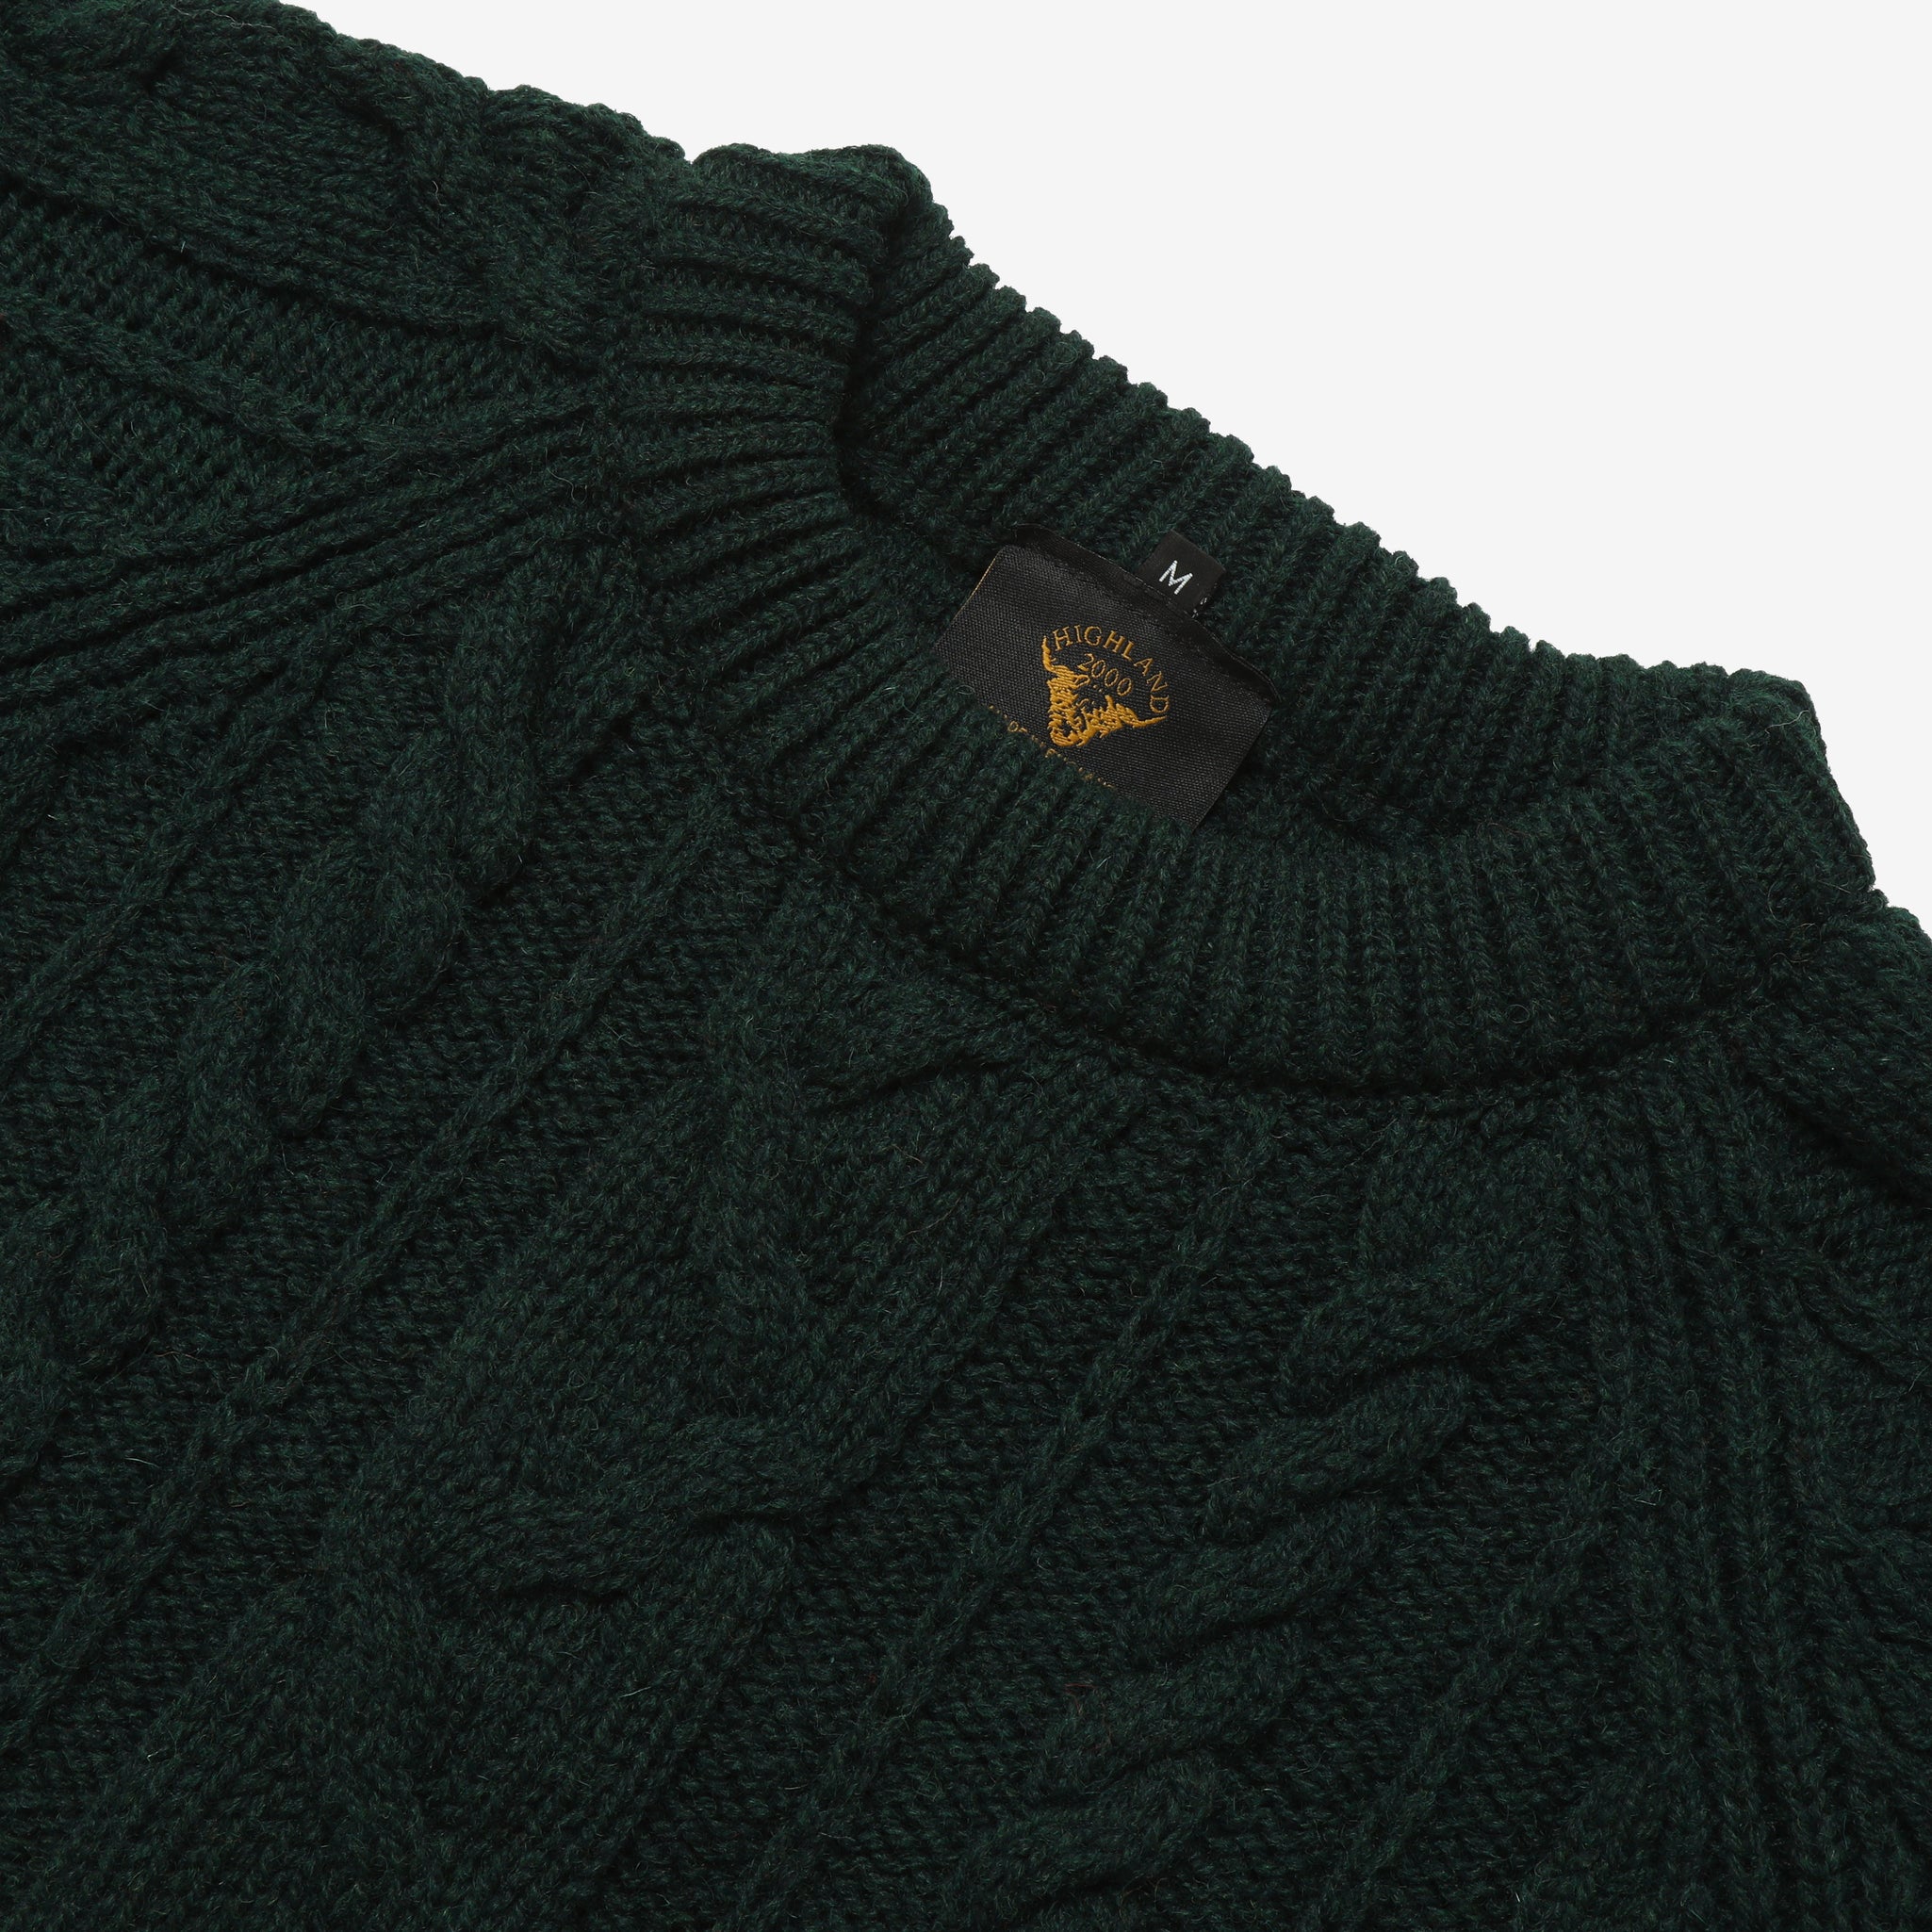 Cable Sweater - Green